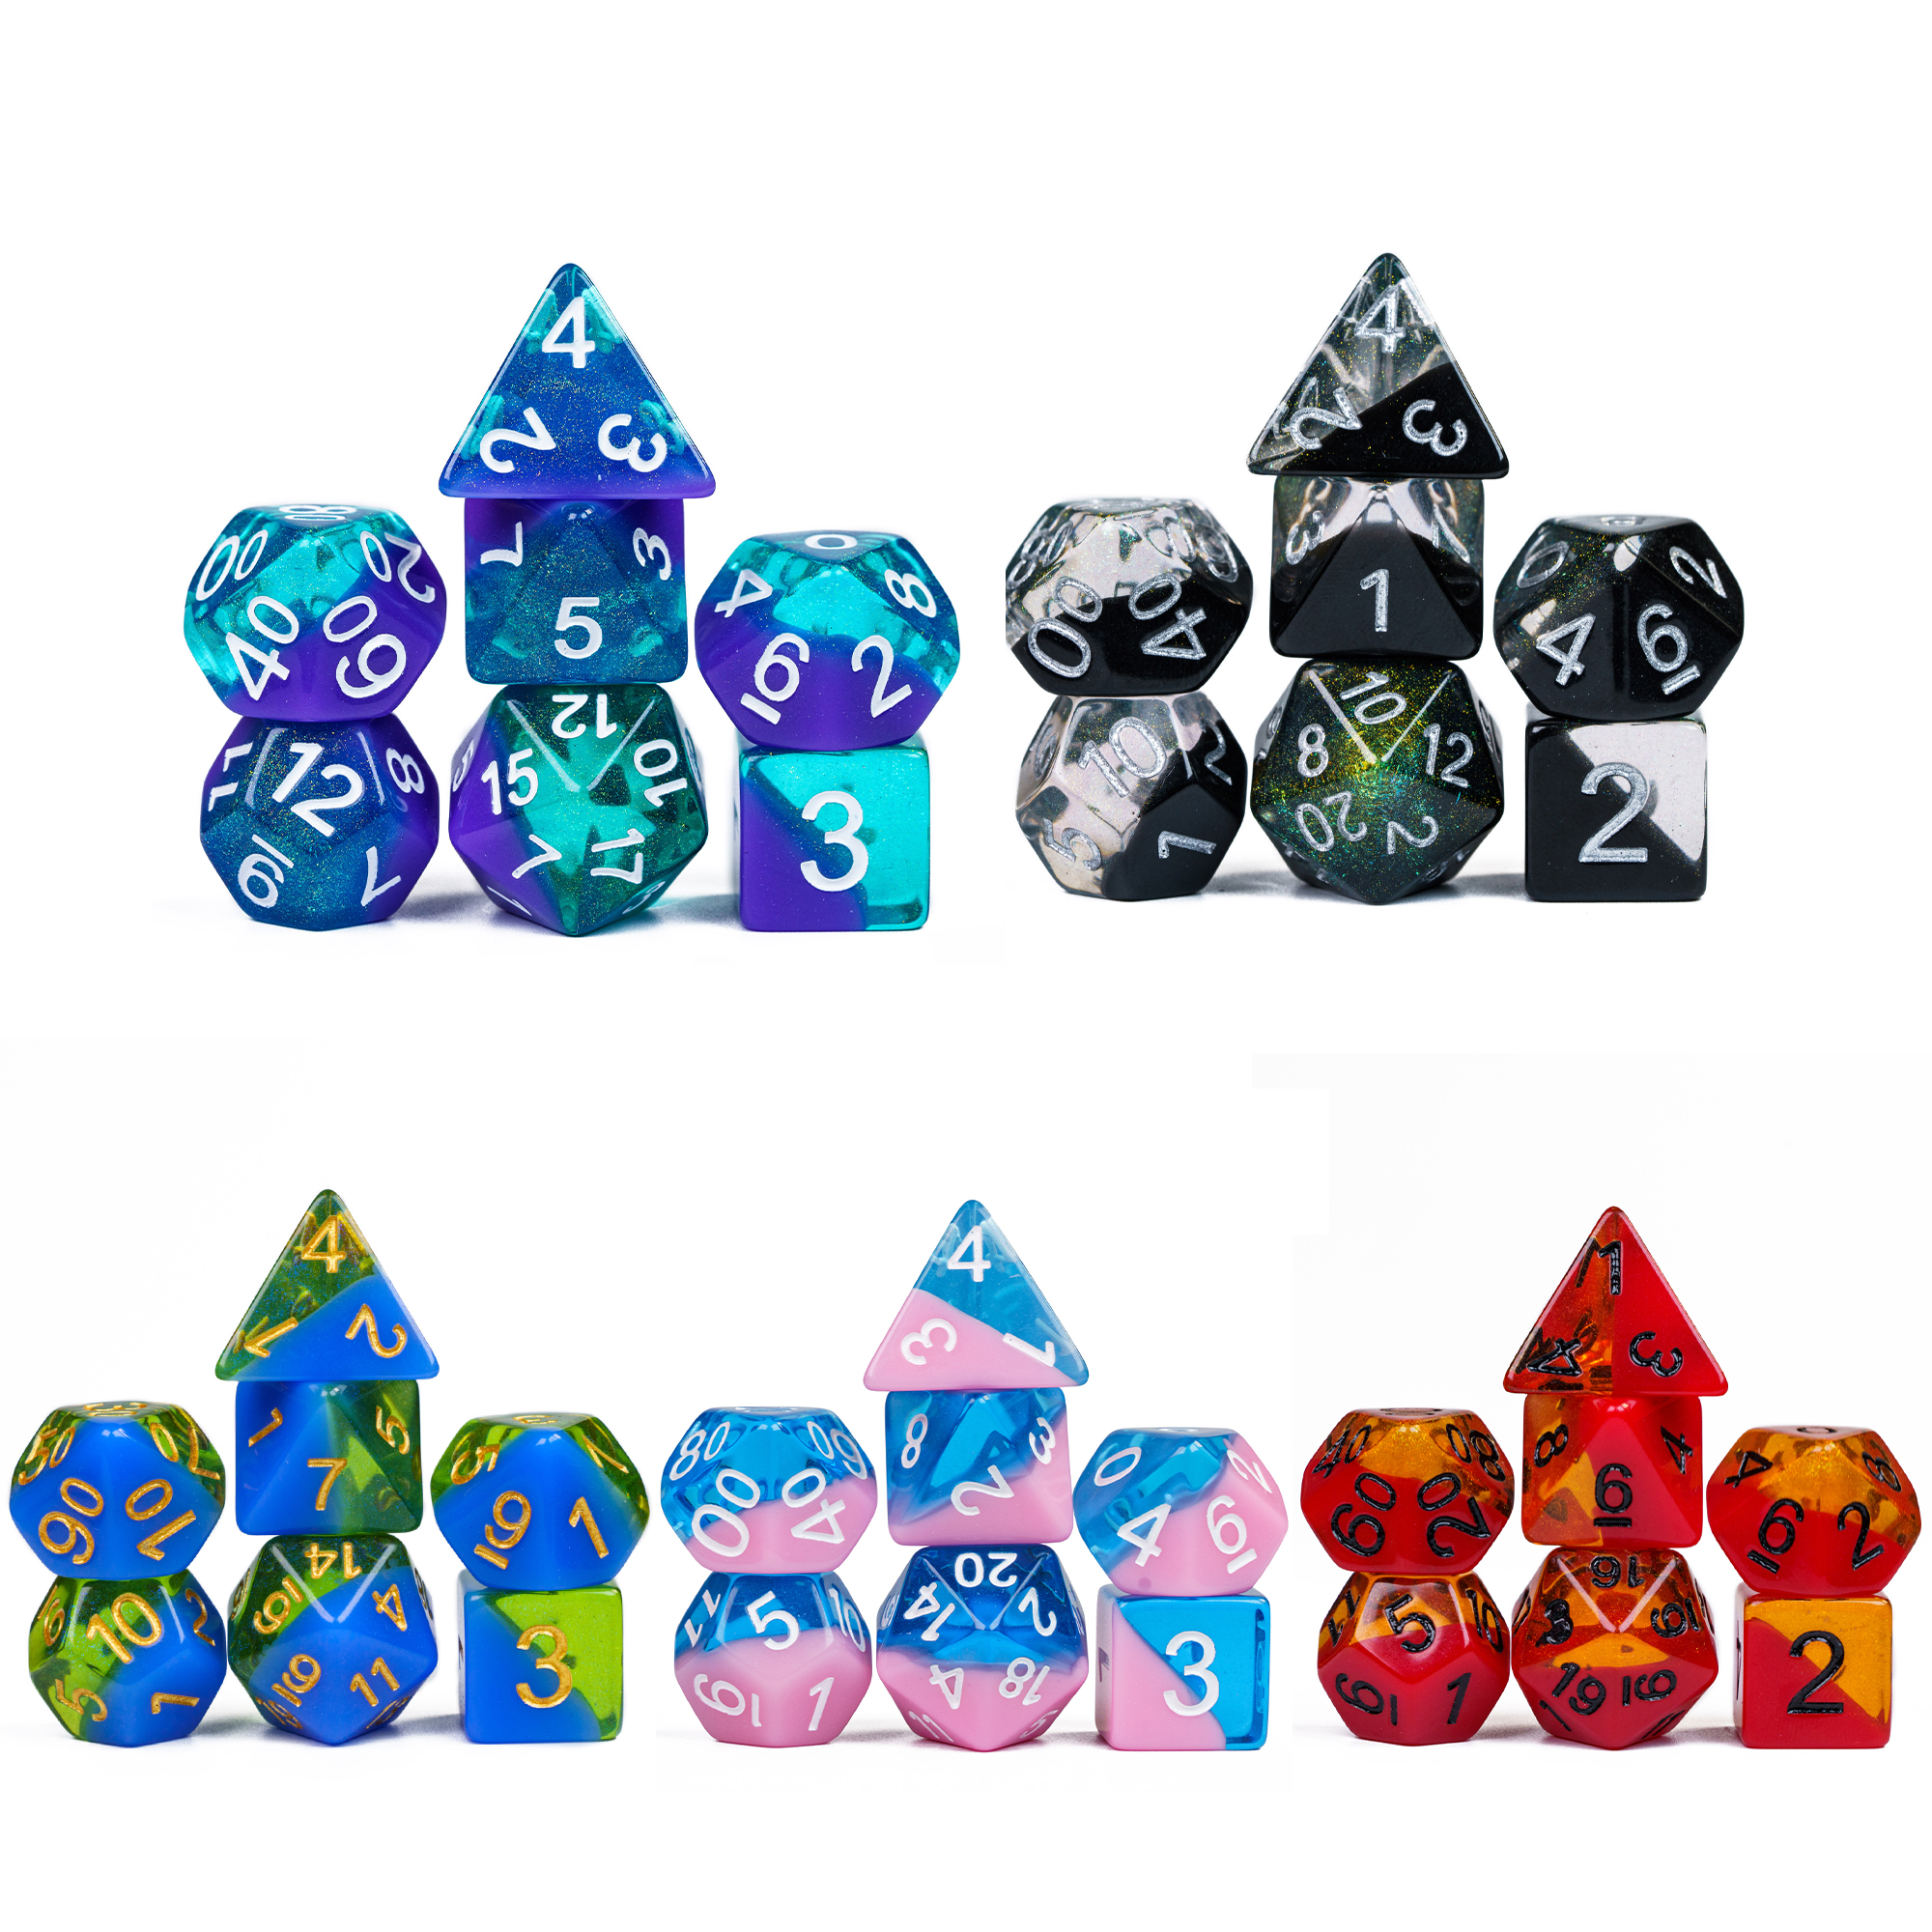 Blue&Cyan UDIXI DND Dice Set Polyhedral DND Dice 7PCS for Dungeon and Dragons Sickle Font RPG Dice for MTG Table Games 